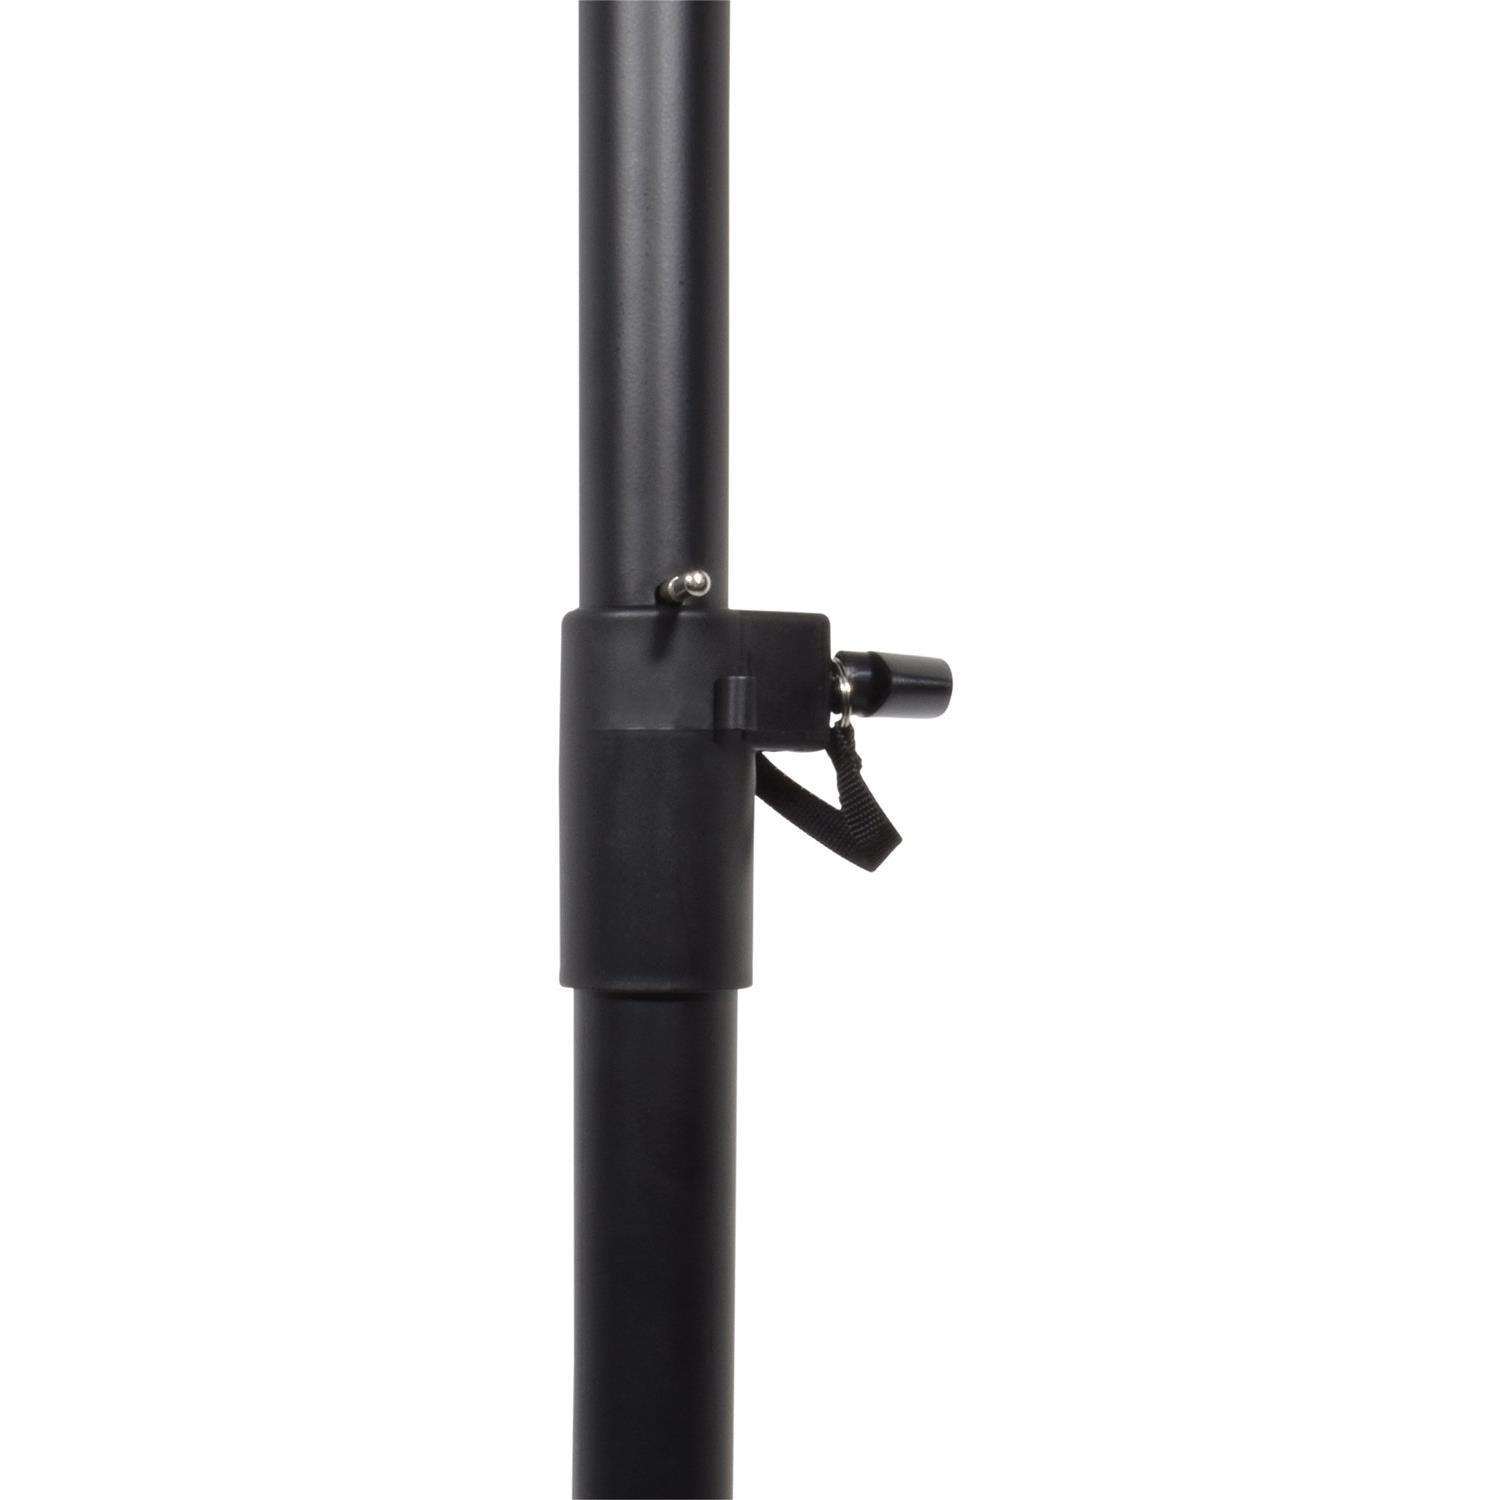 2 x QTX Speaker Stand Black with Square Base - DY Pro Audio